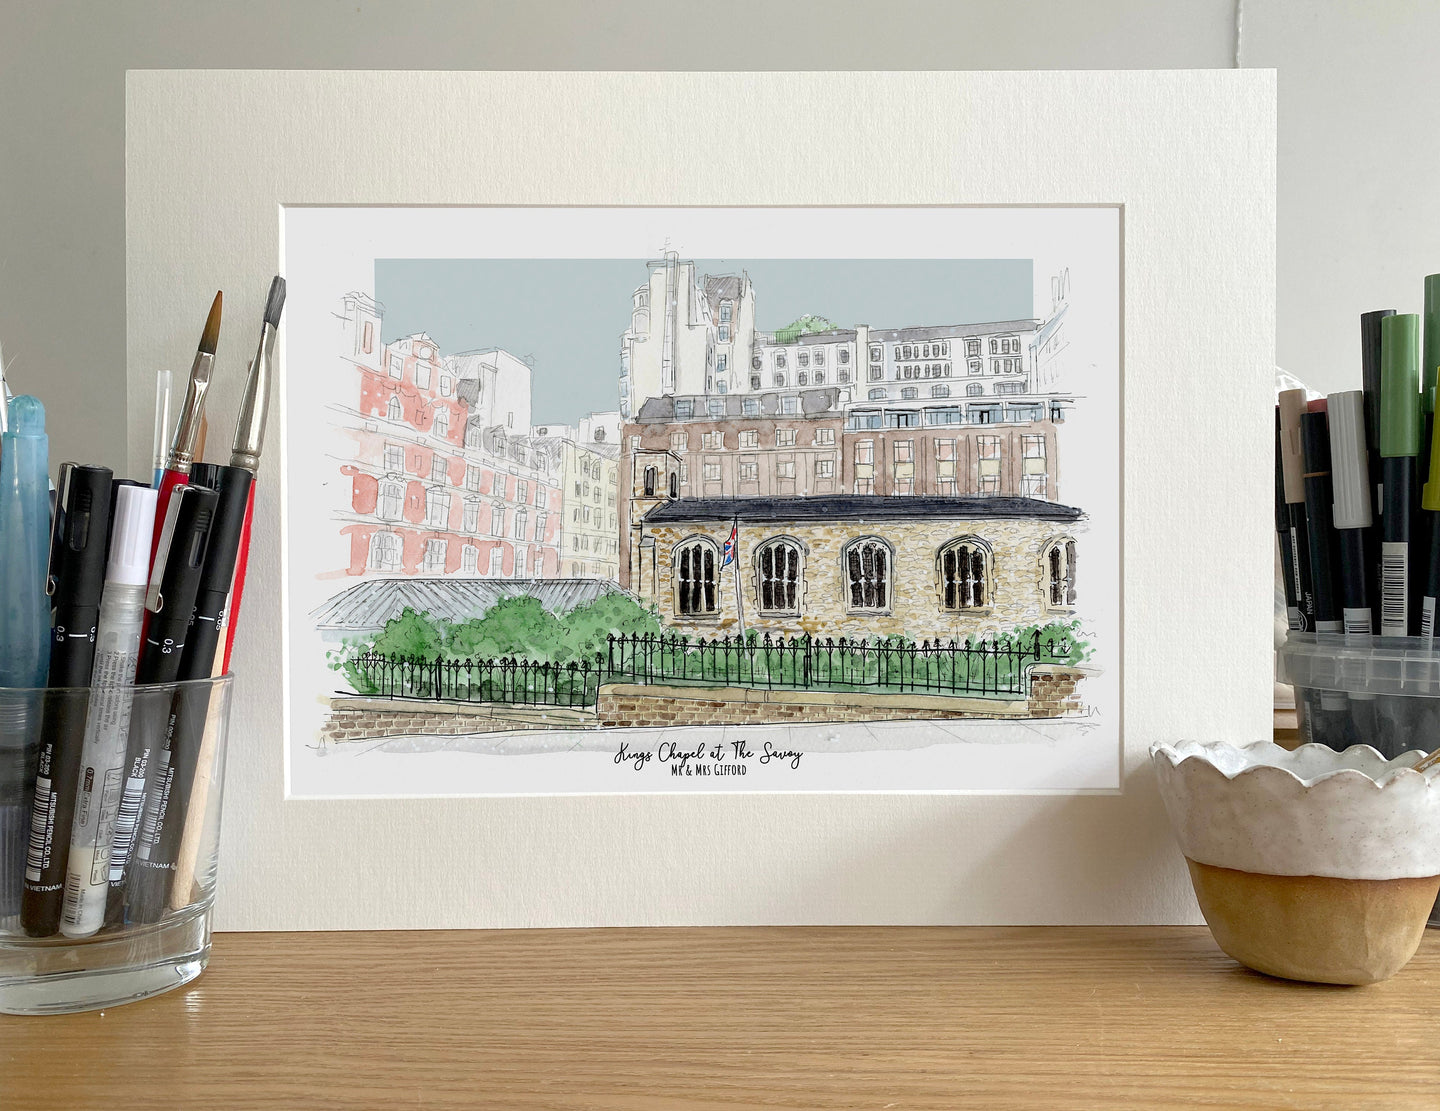 Personalised Kings Chapel at The Savoy Giclee Art Print  - Watercolour Hand Drawn illustration - Made to Order  - London Wedding Venue Art